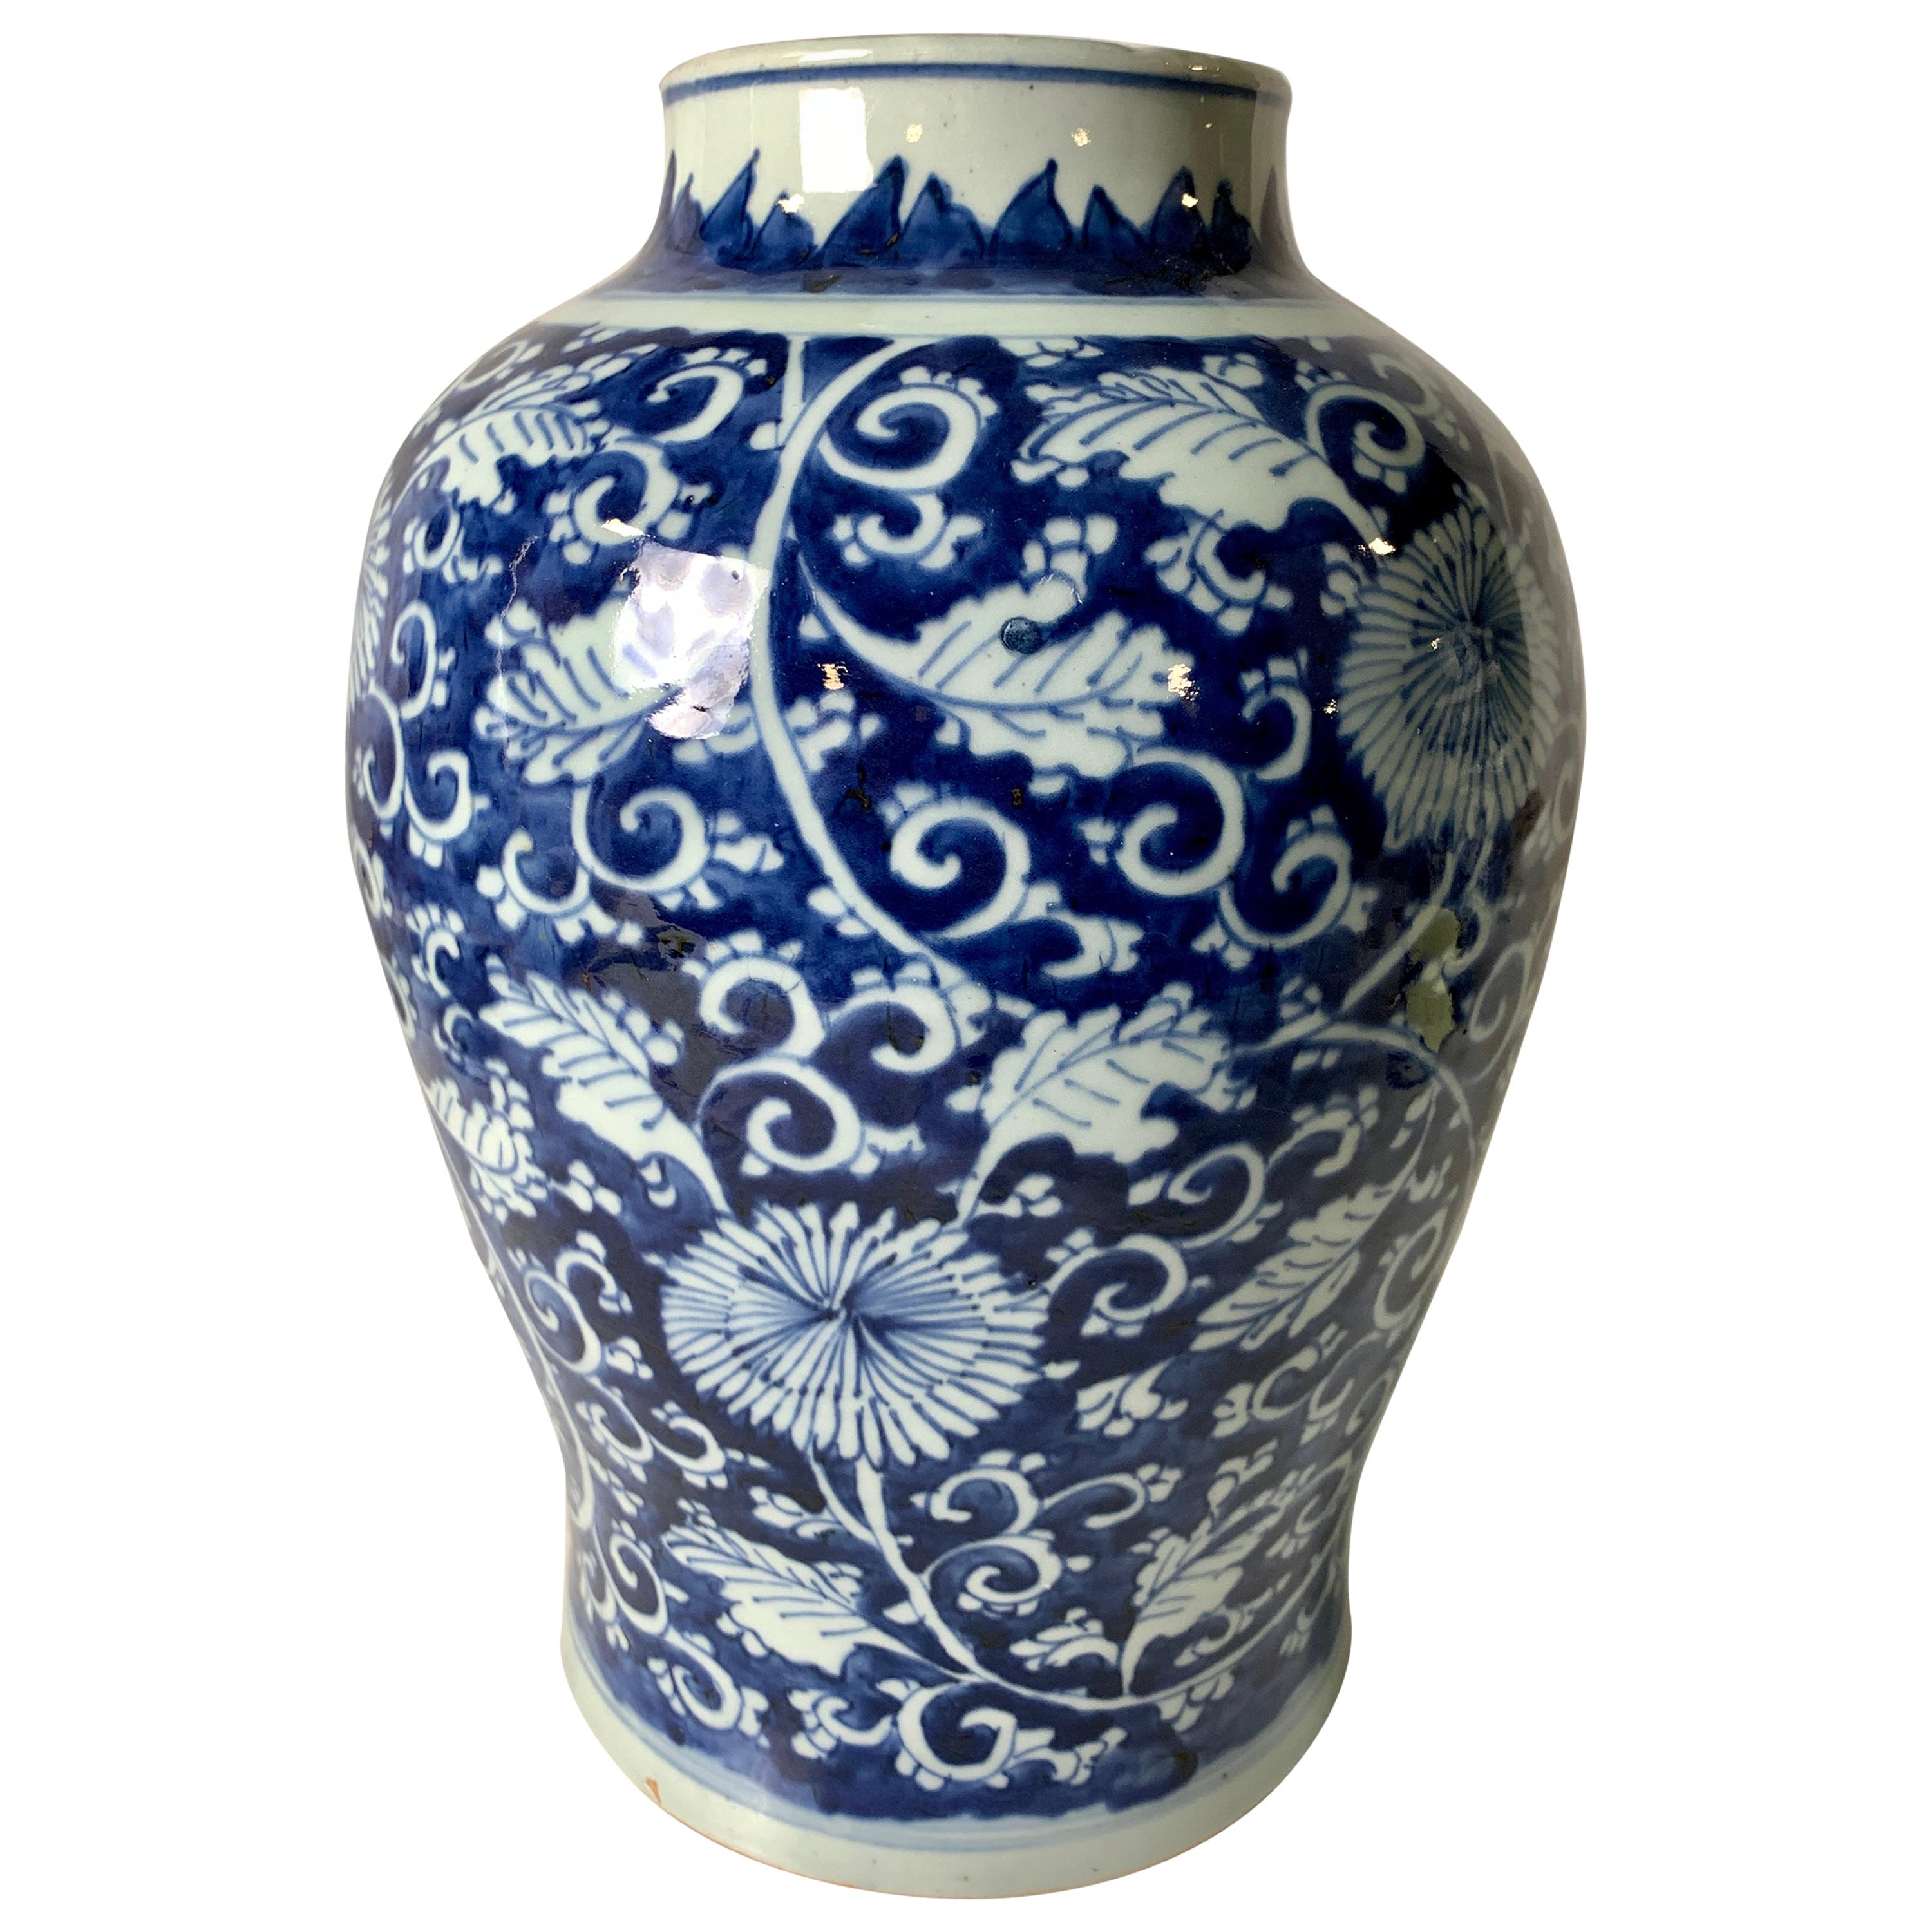 Blue and White Chinese Porcelain Vase Made in the Kangxi Era